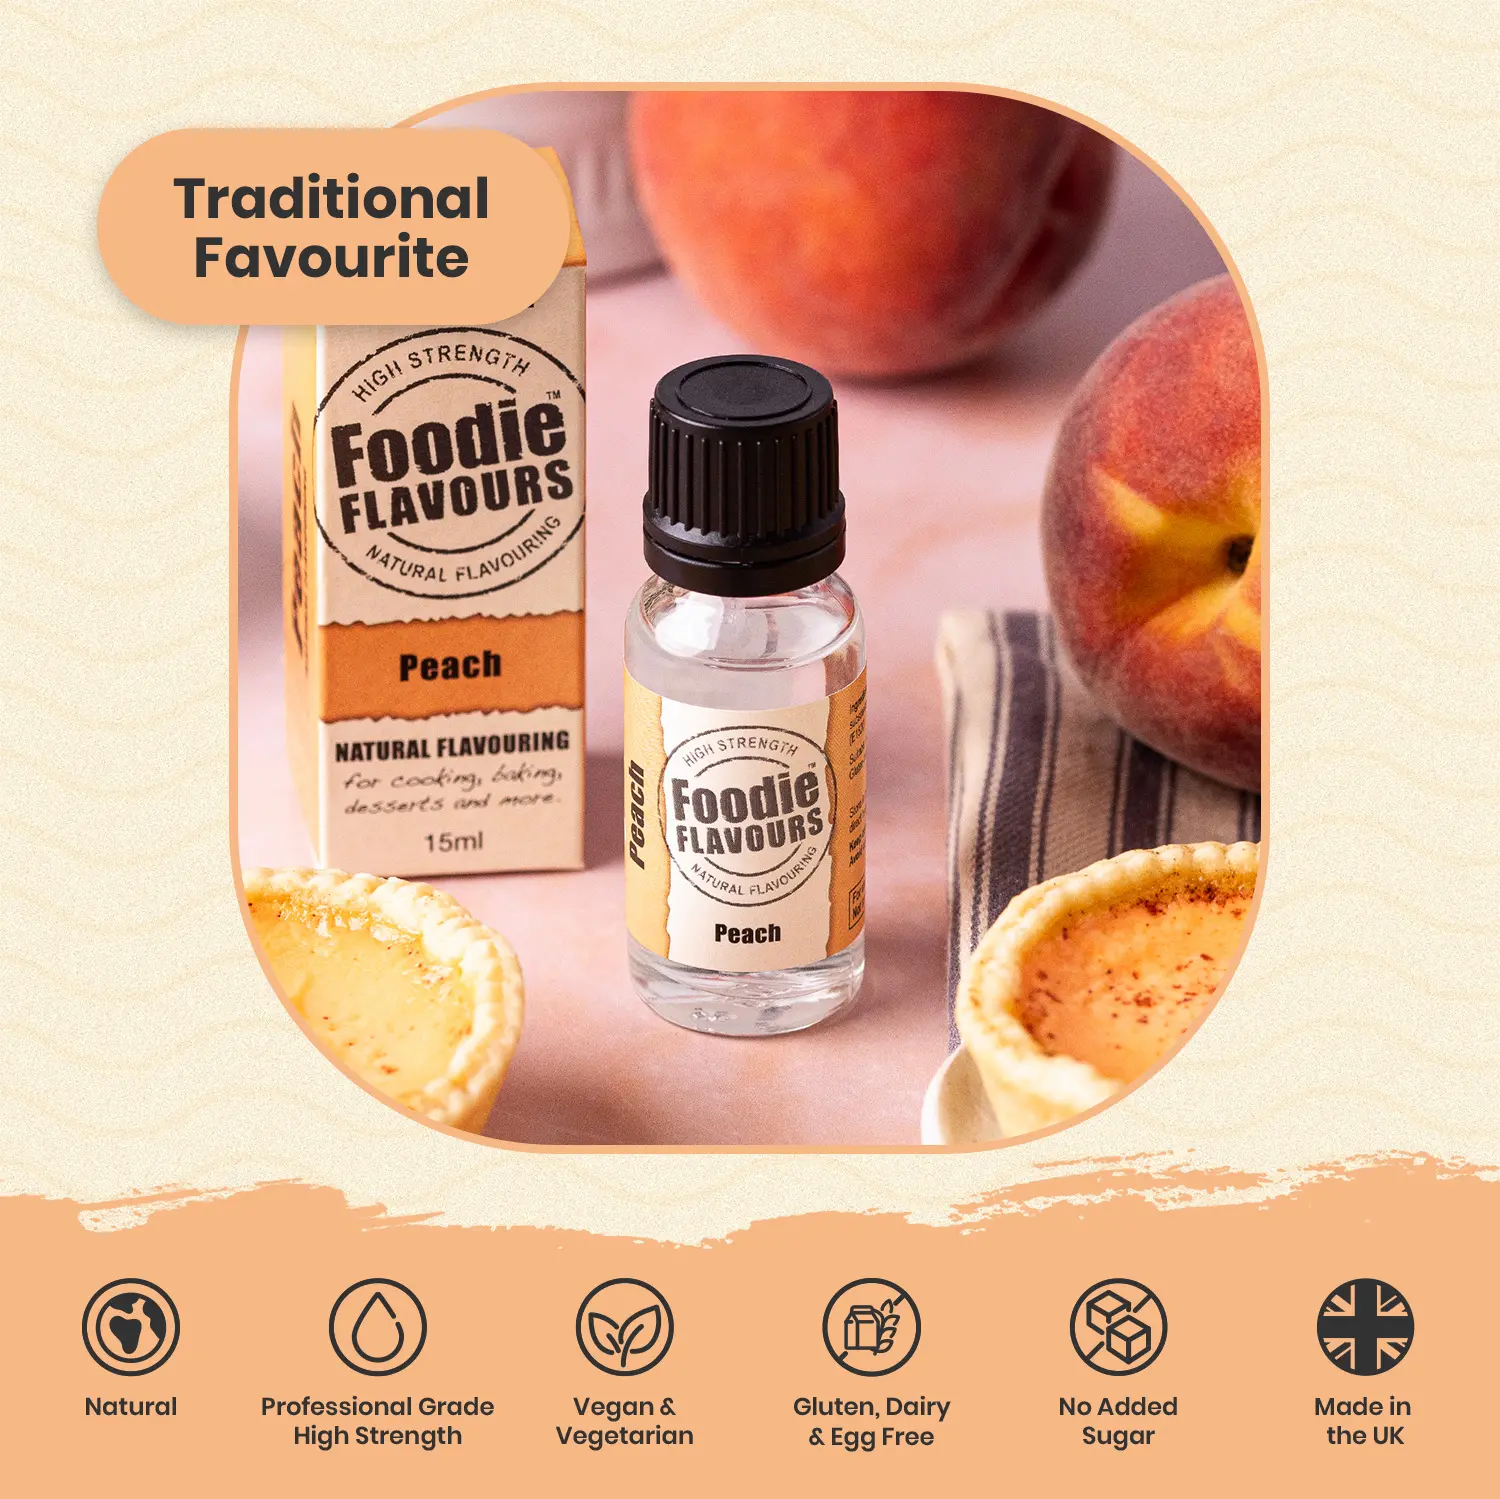 Peach Natural Flavouring - Features